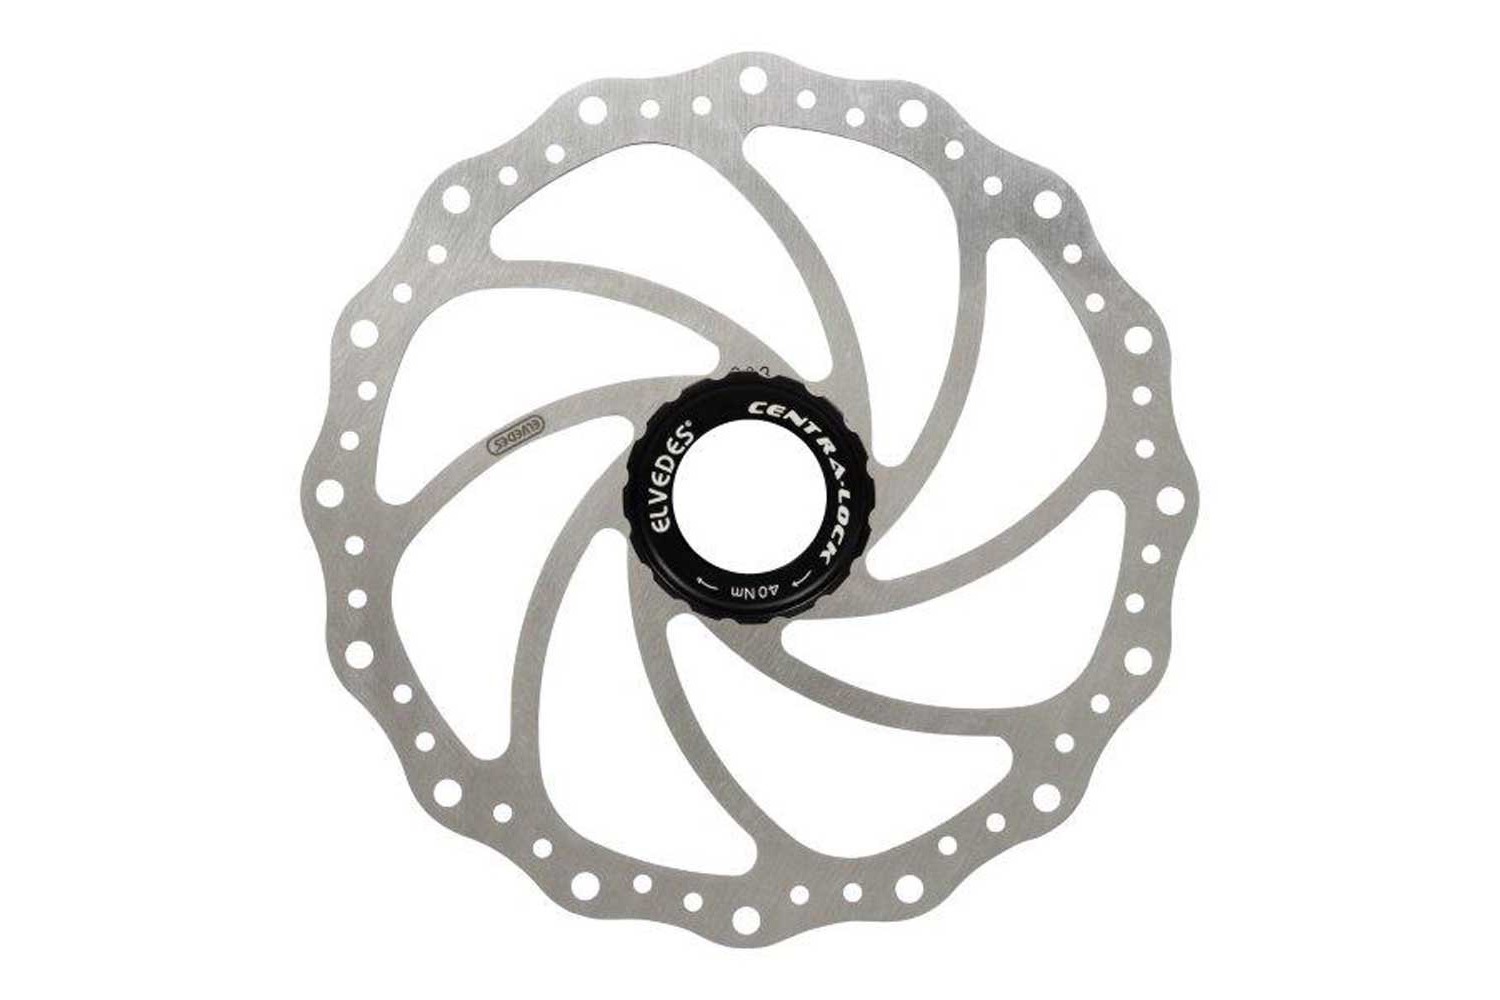 Elvedes SC14 140mm Stainless Rotor with Centra-Lock